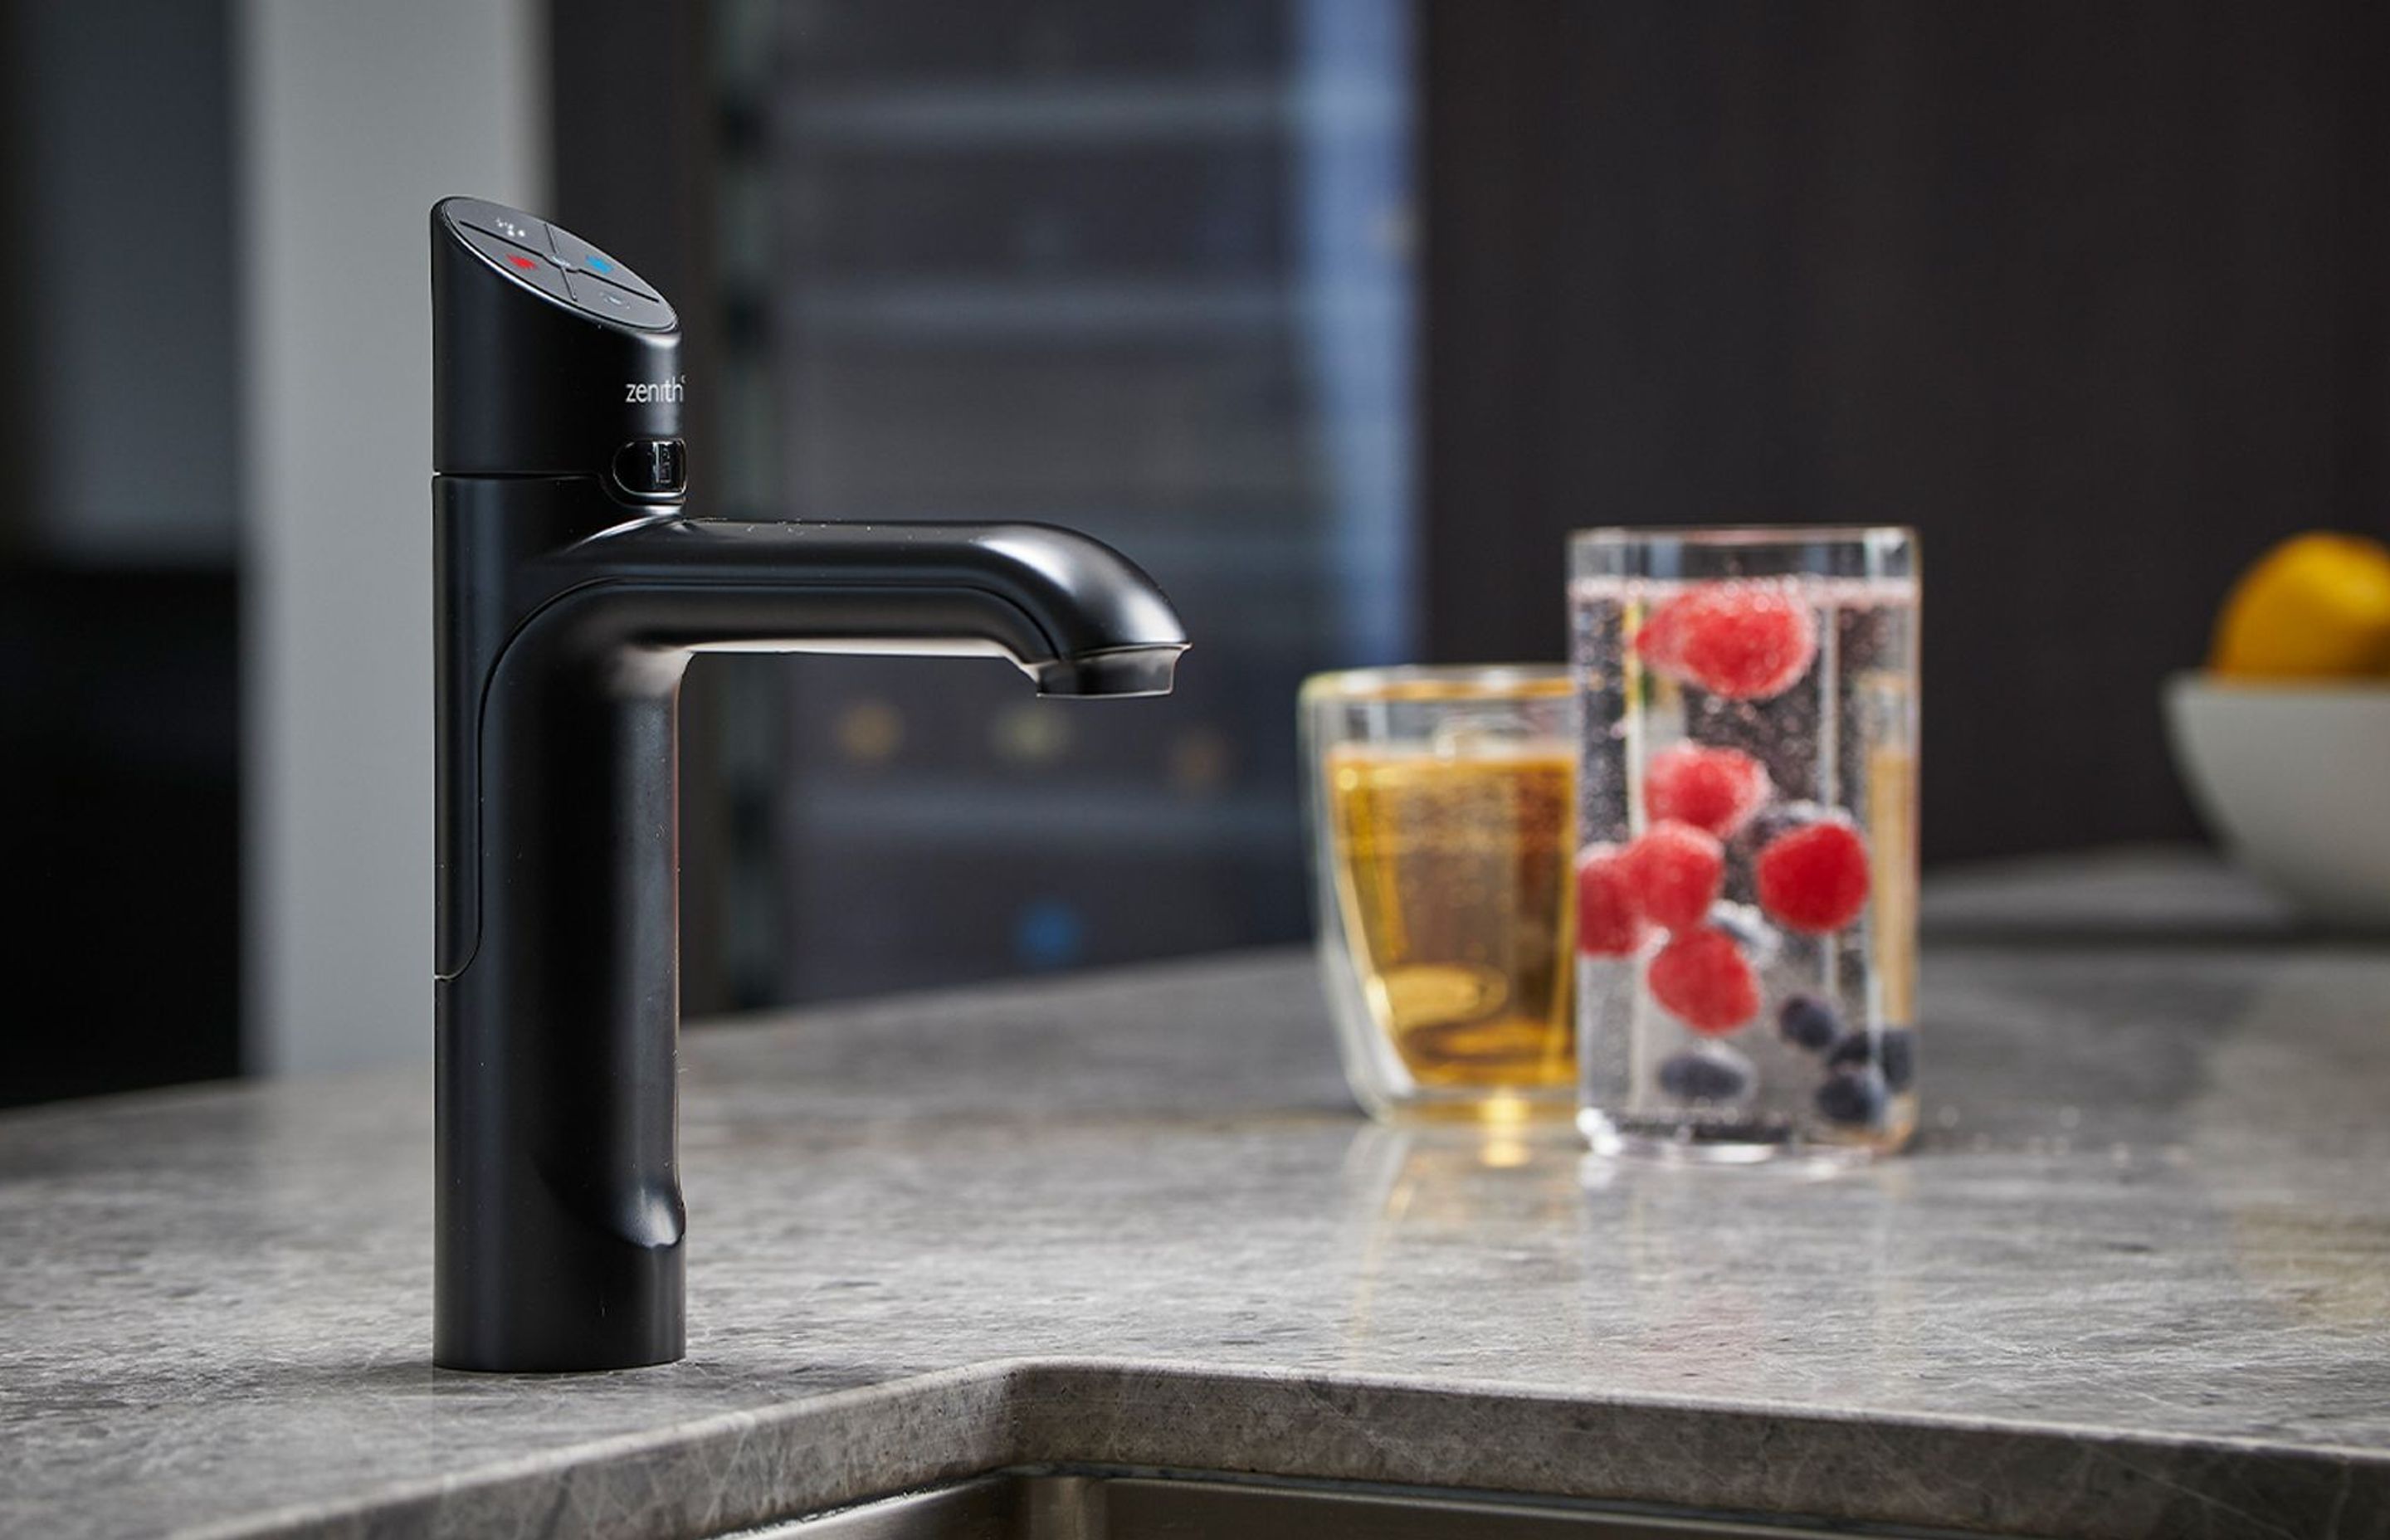 Chilled, sparkling, boiling, ambient – a tap that innovates how we drink water